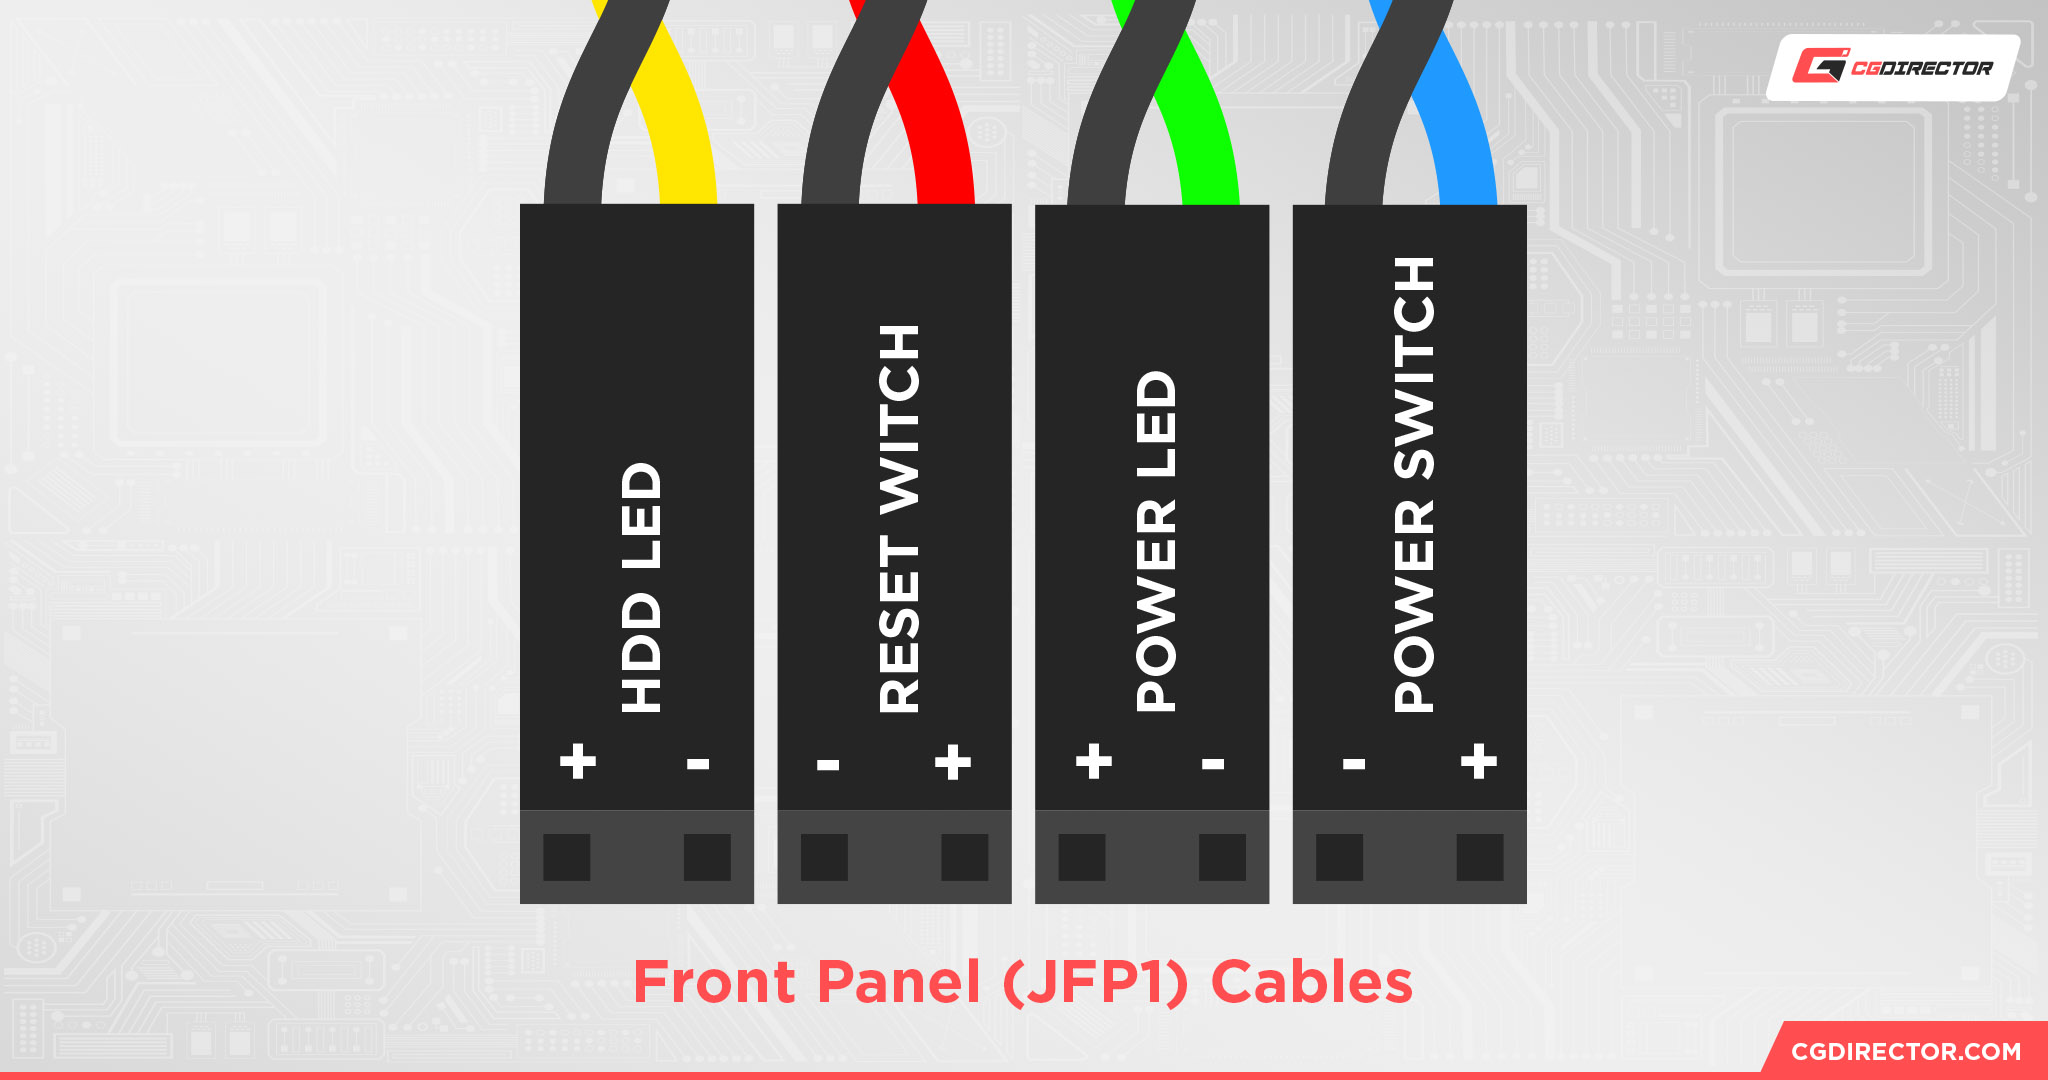 Front Panel (JFP1) Cables